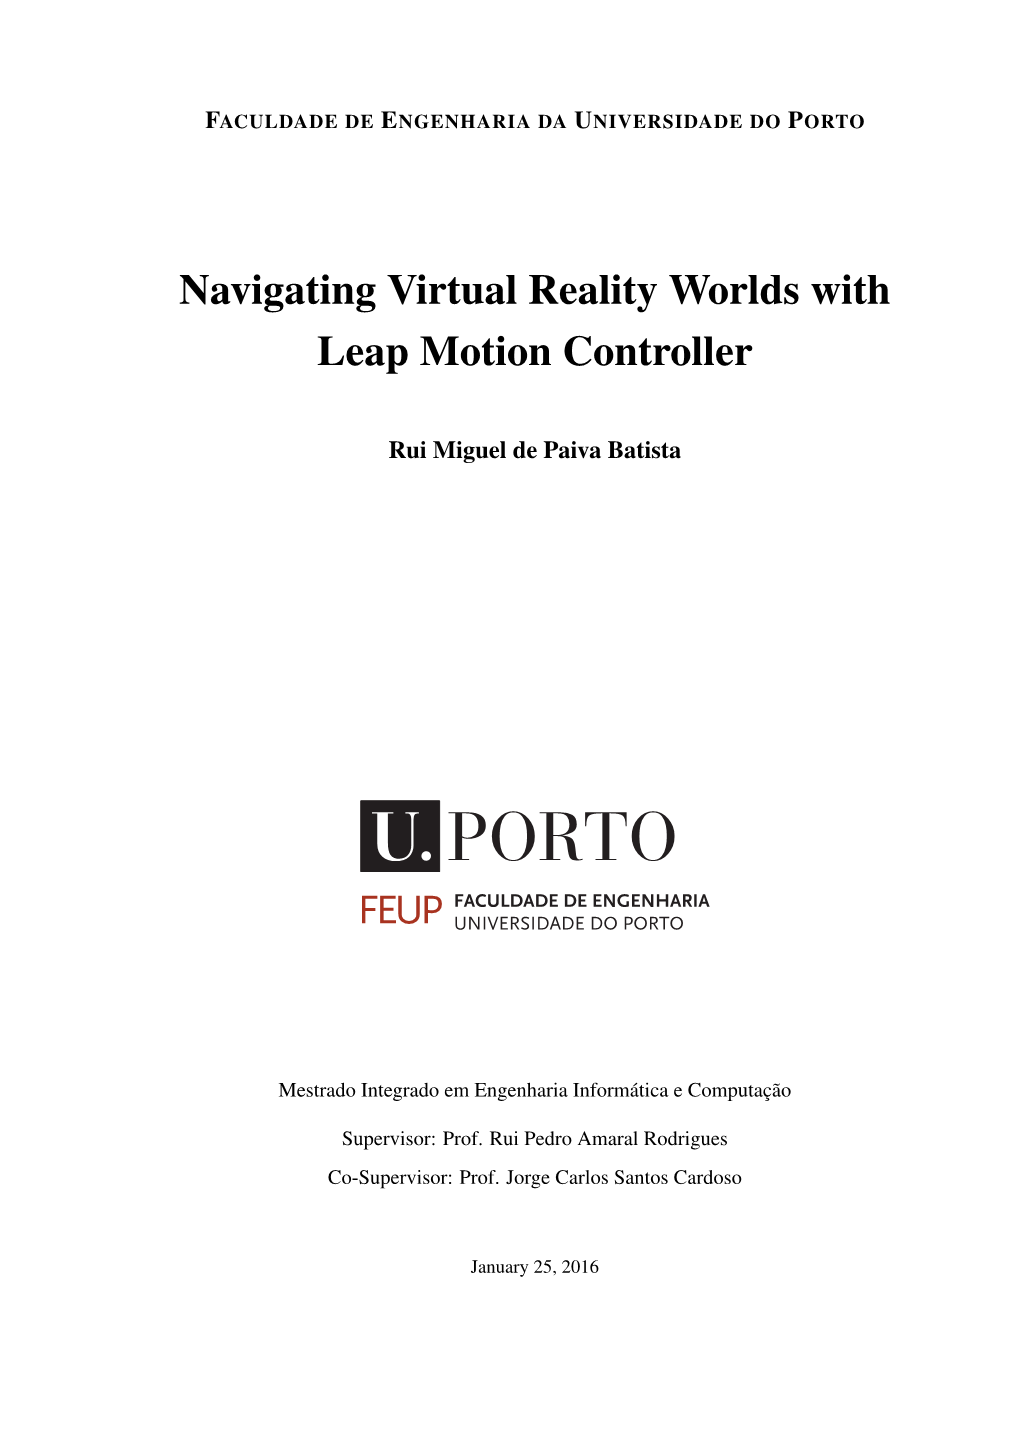 Navigating Virtual Reality Worlds with Leap Motion Controller